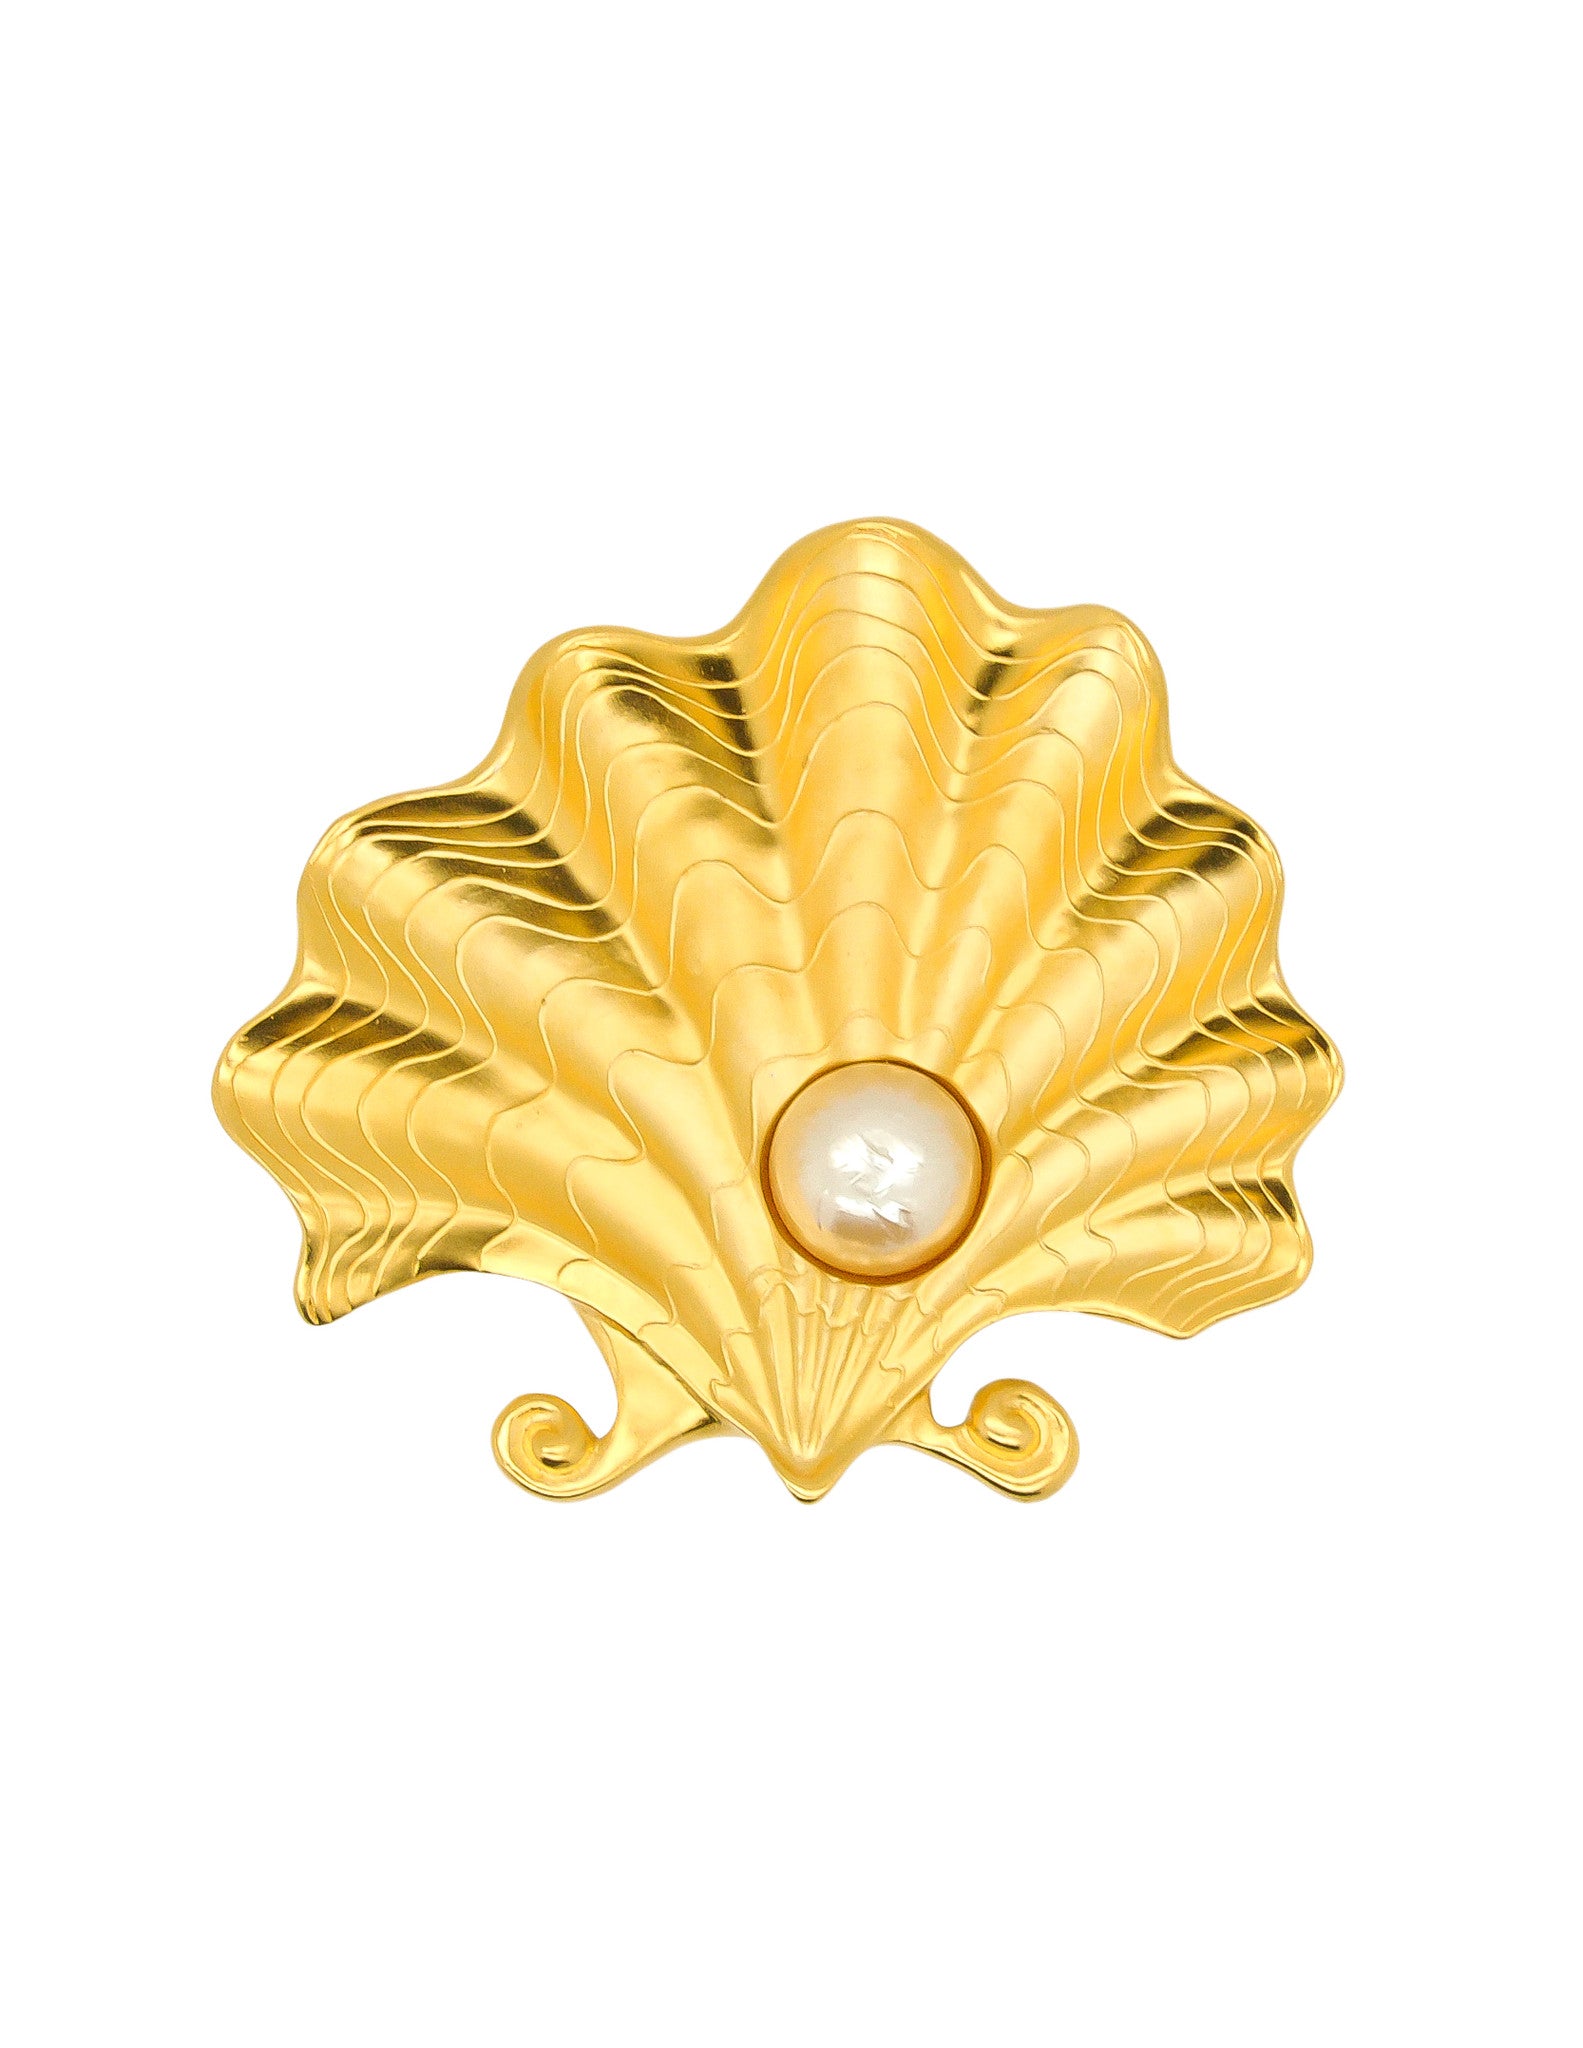 Karl Lagerfeld Vintage Pearl and Oyster Shell Brooch